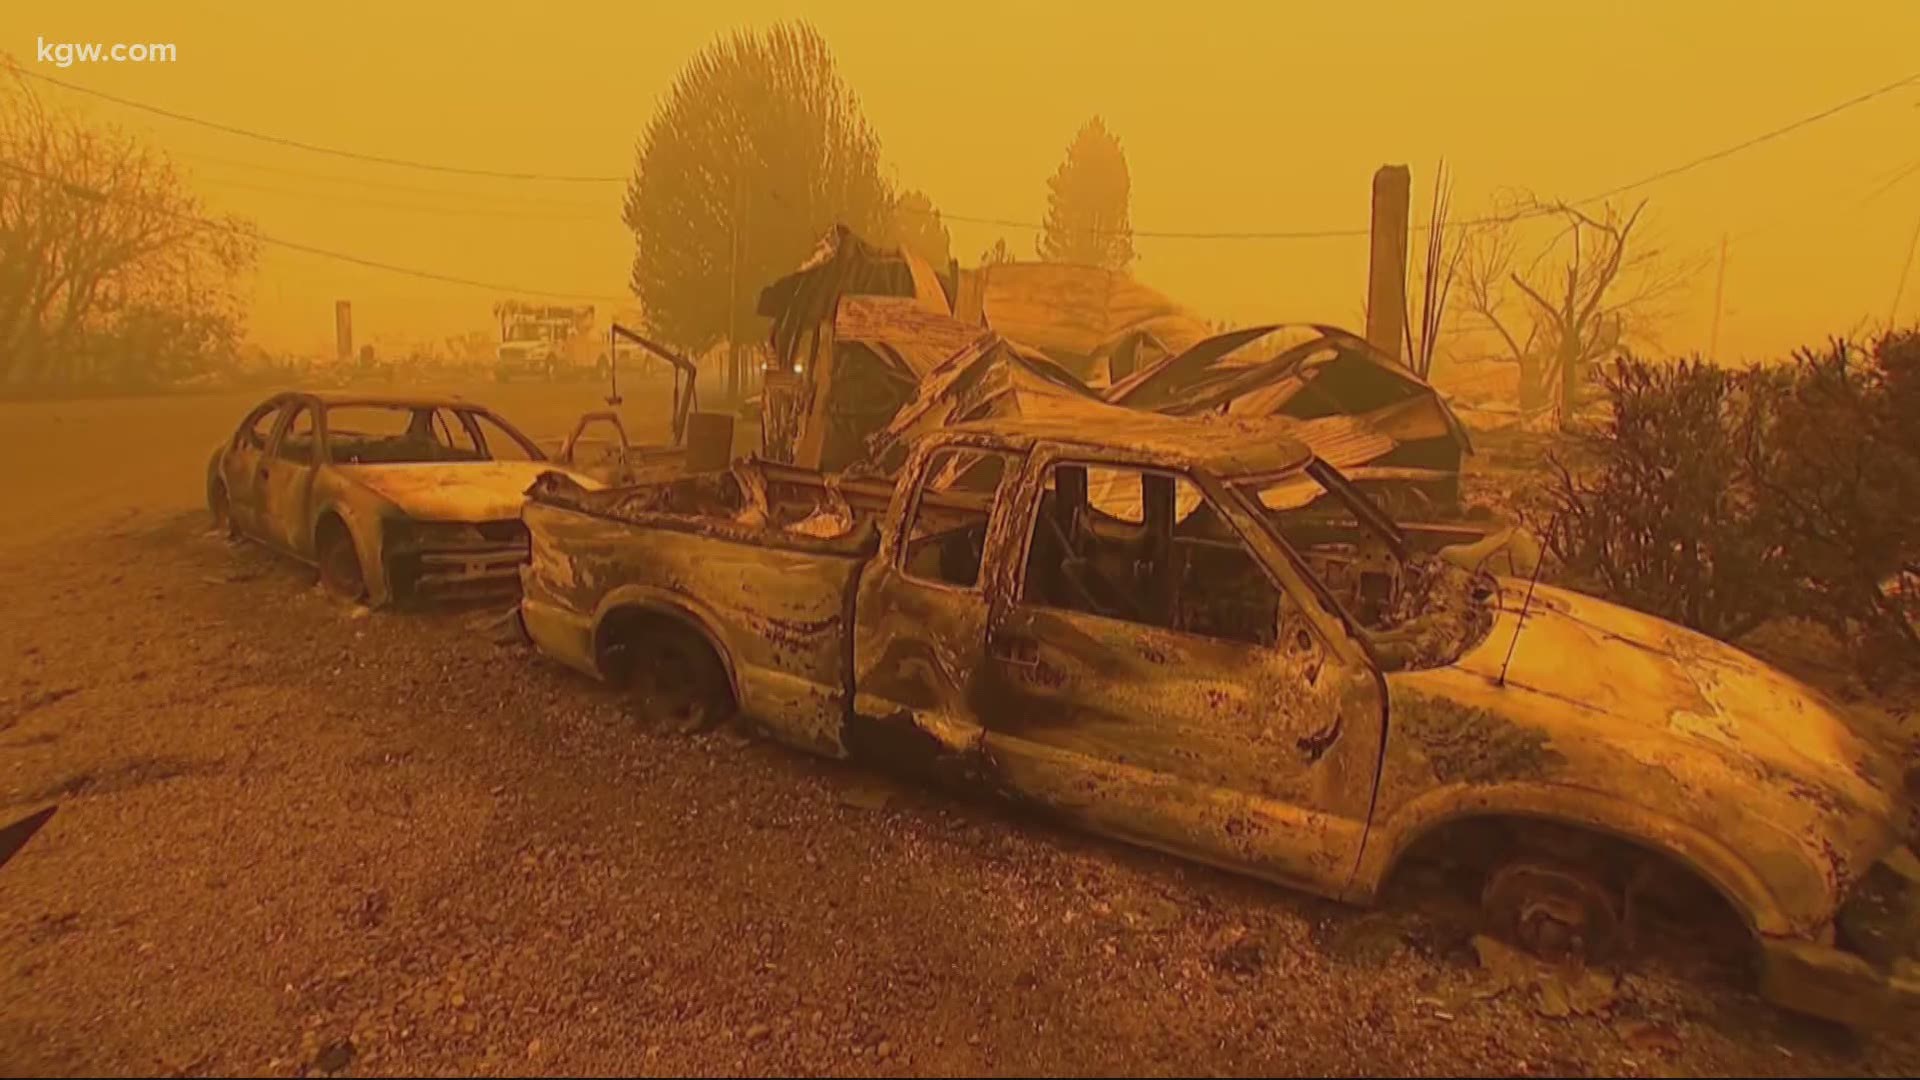 We recap the insurmountable damage caused by dozens of brutal wildfires around the state of Oregon in early September 2020.